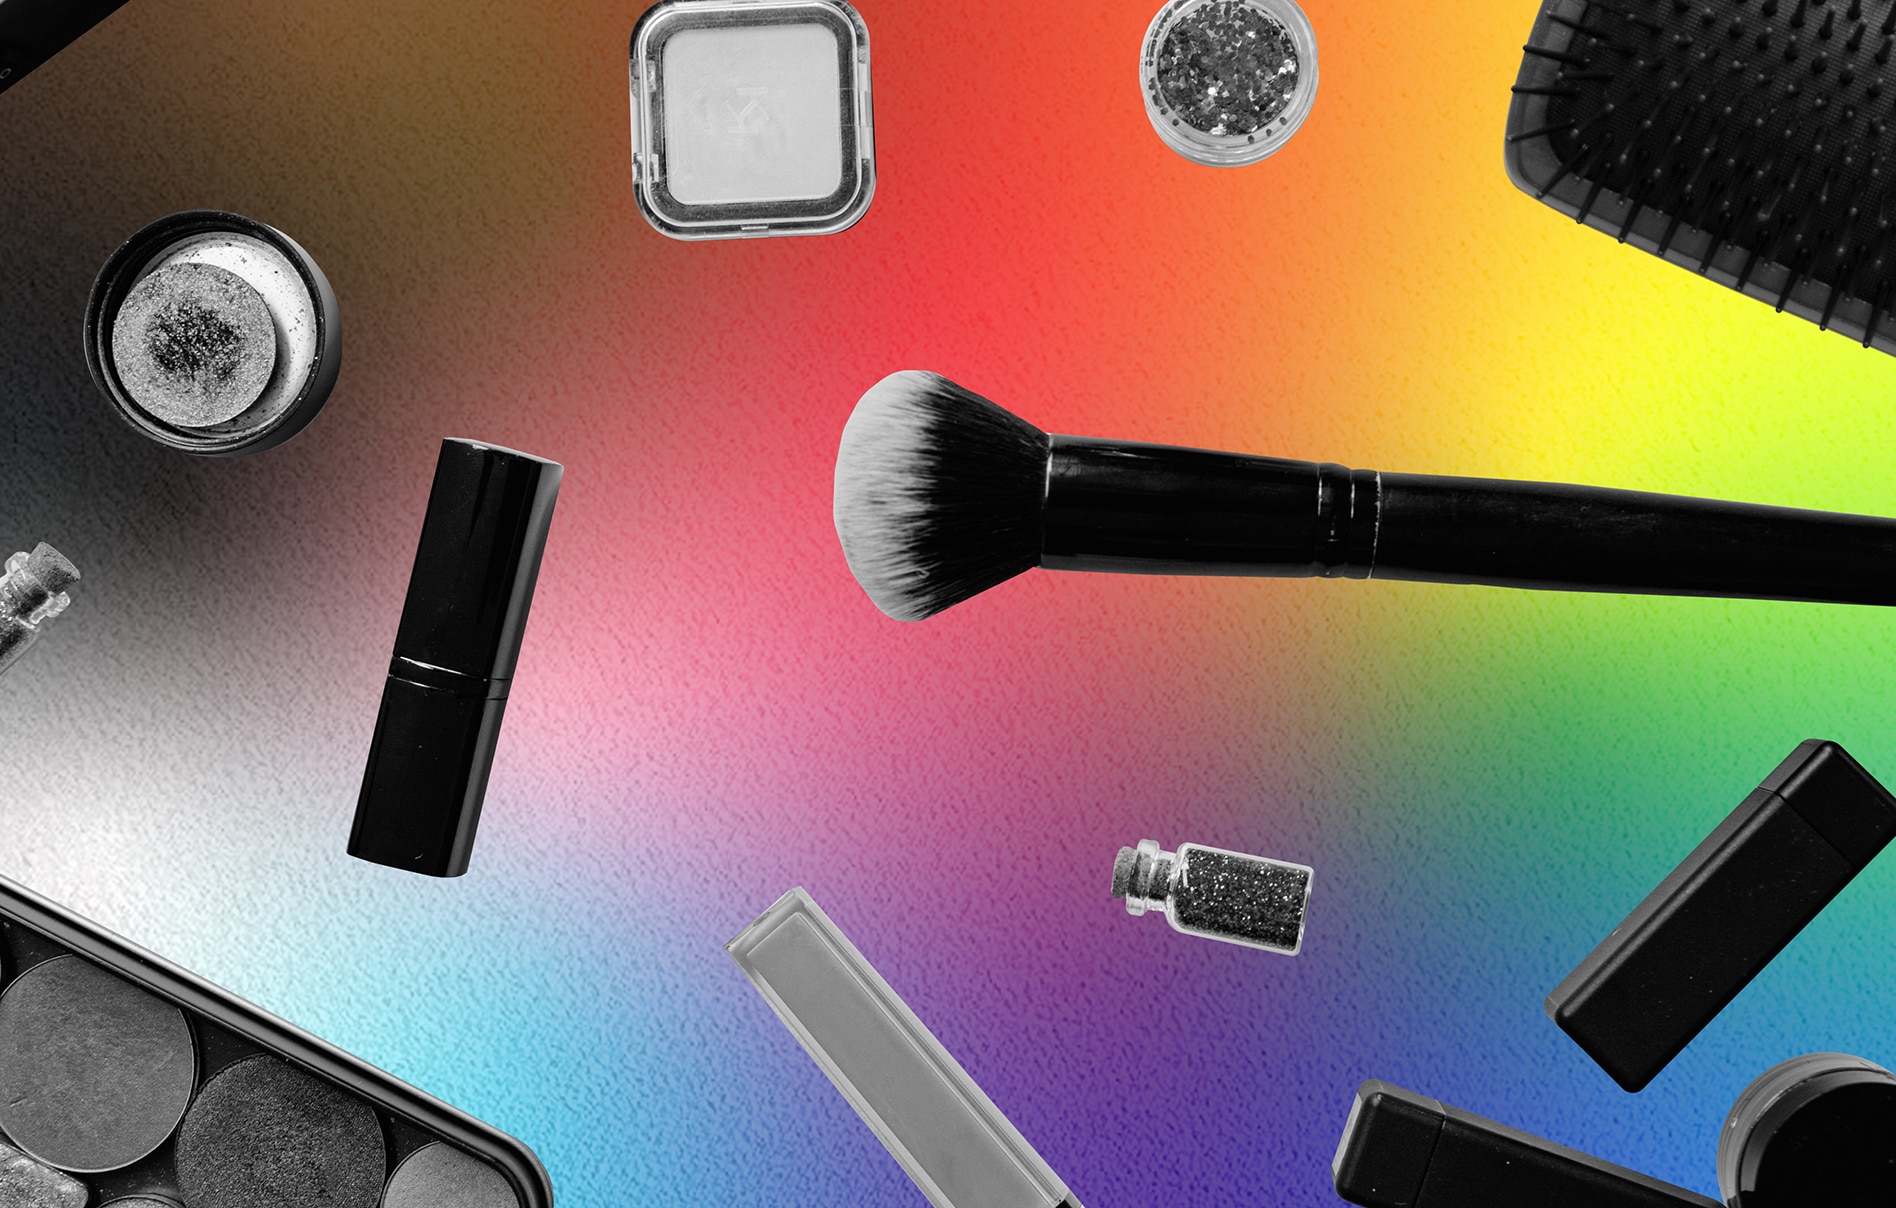 An assortment of beauty tools scattered across a pride-based gradient background